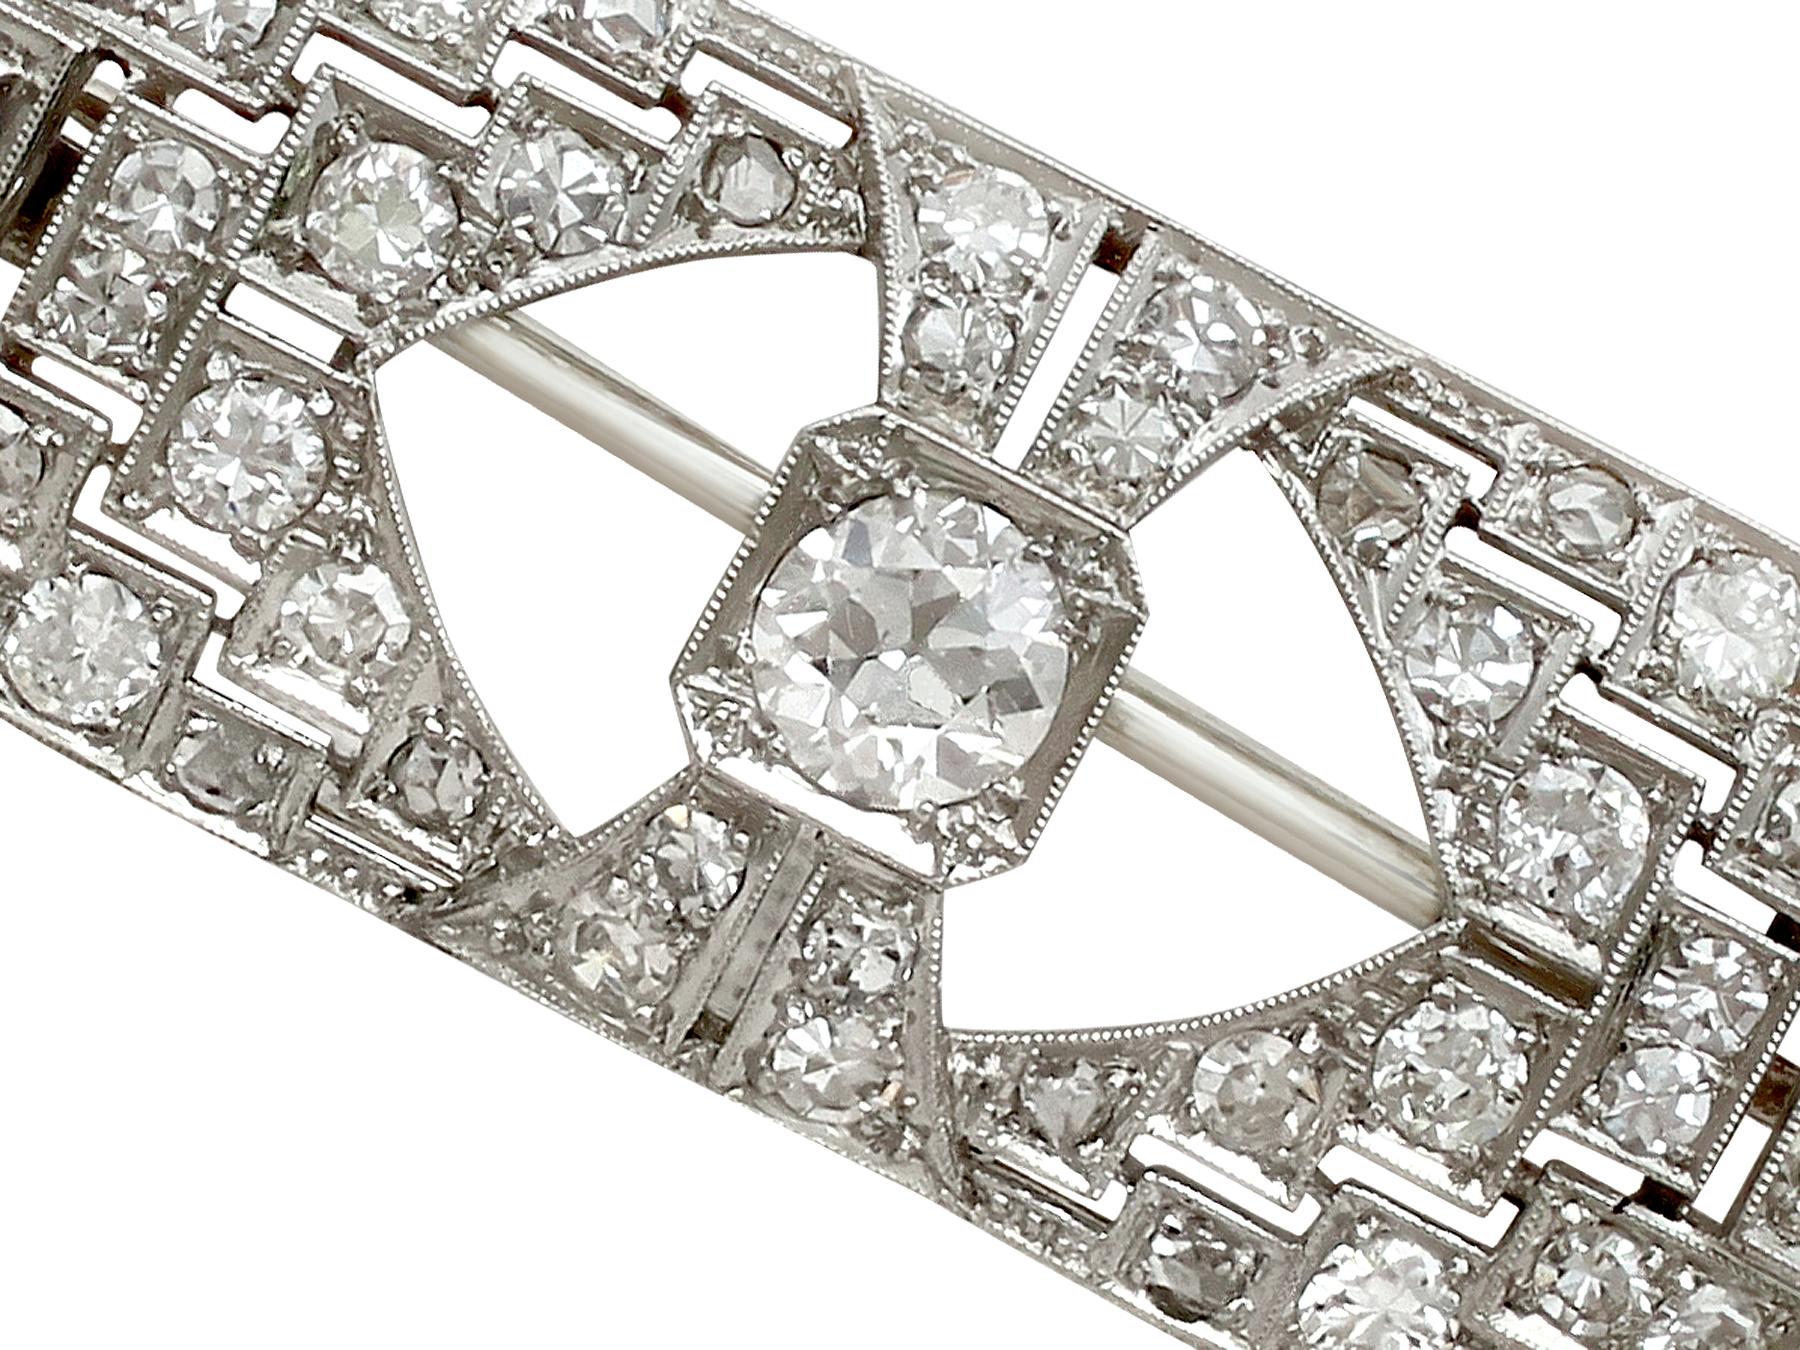 An impressive antique Art Deco 2.23 carat diamond and 9 karat white gold, platinum set brooch; part of our diverse antique jewellery and estate jewelry collections

This stunning, fine and impressive Art Deco diamond brooch has been crafted in 9k